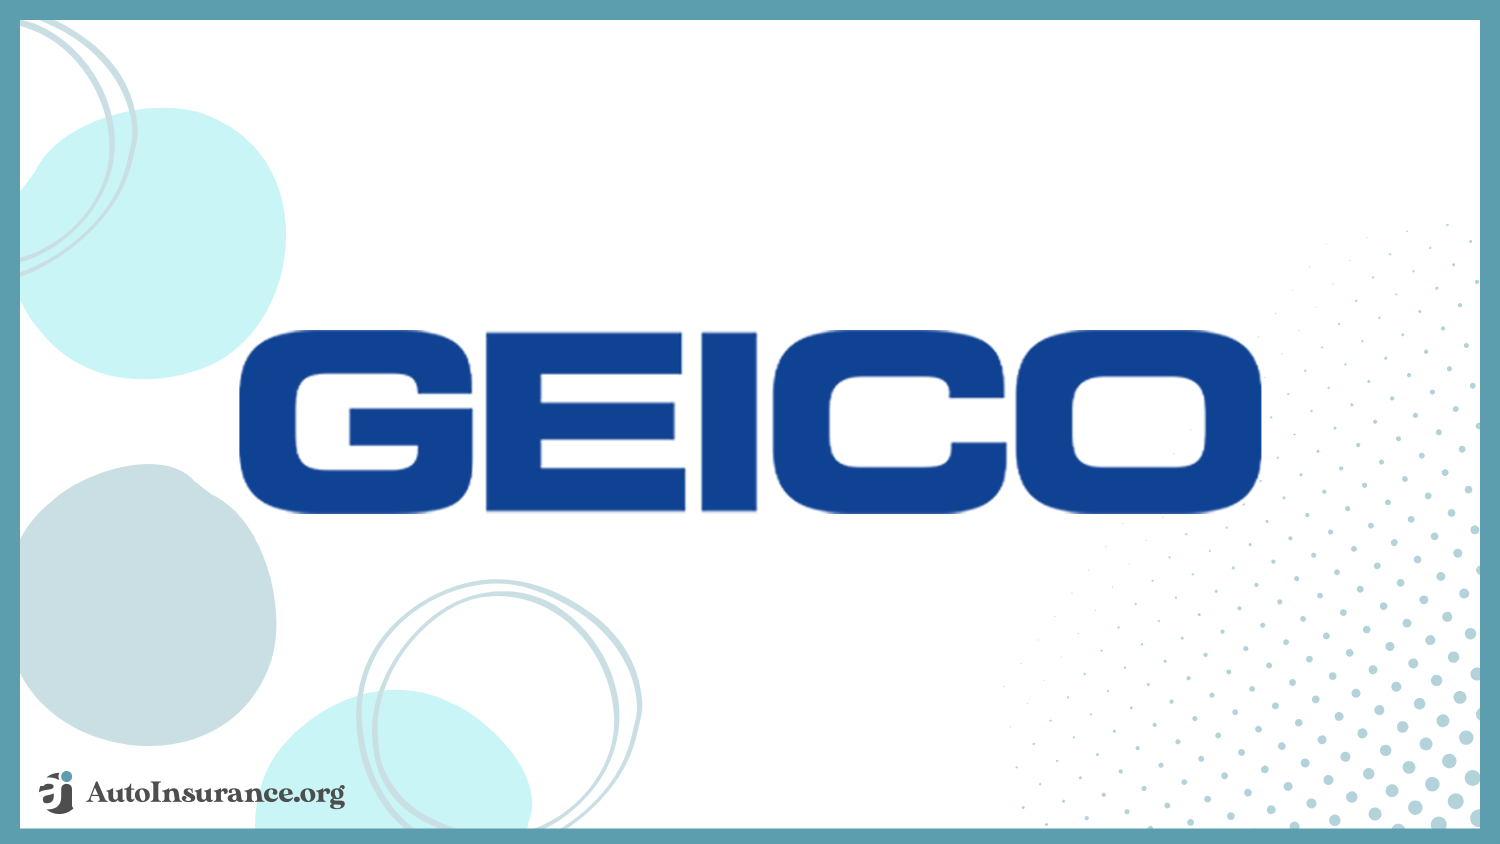 Geico: Best Auto Insurance for hybrid vehicles